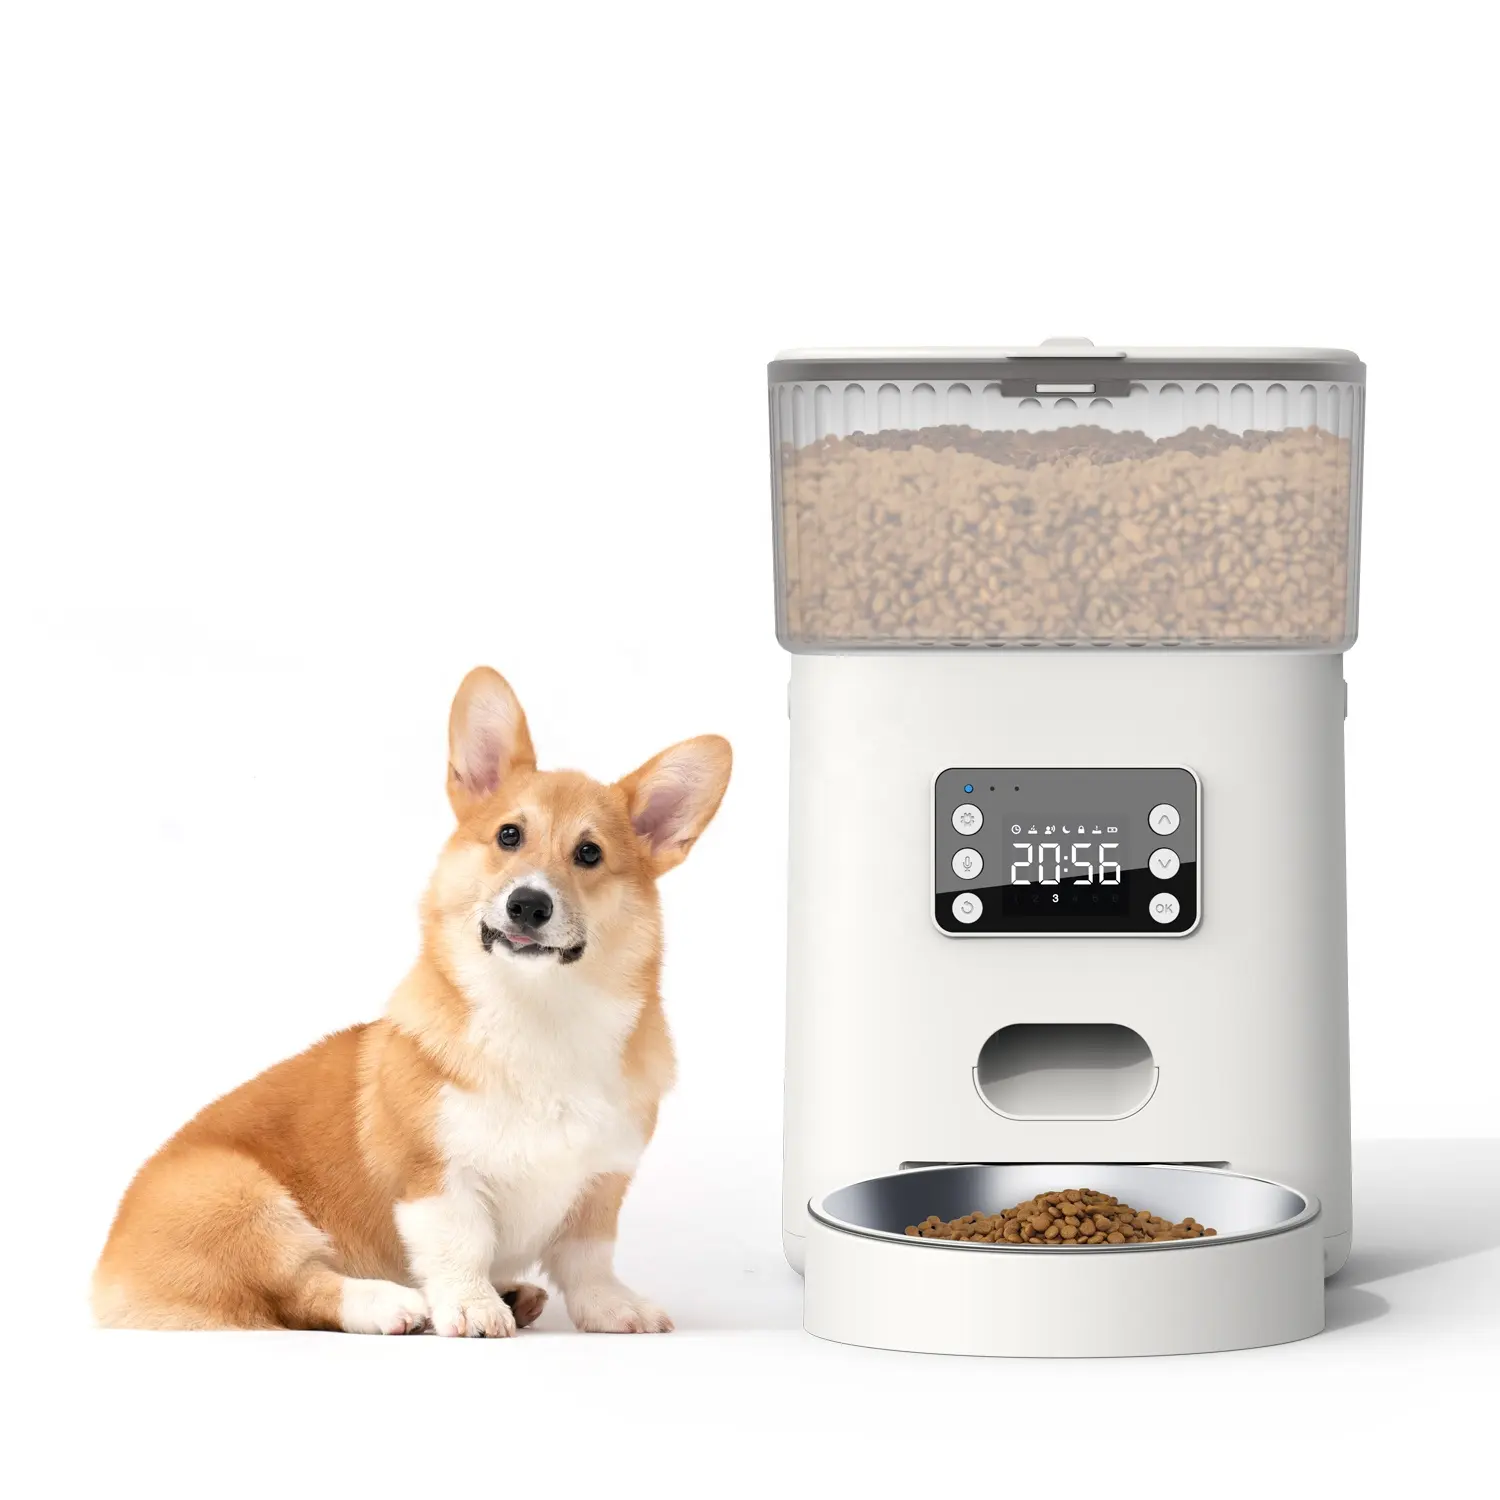 2022 New Style Automatically feeding by schedule and manual feeding Pet Feeder for Dog and Cat